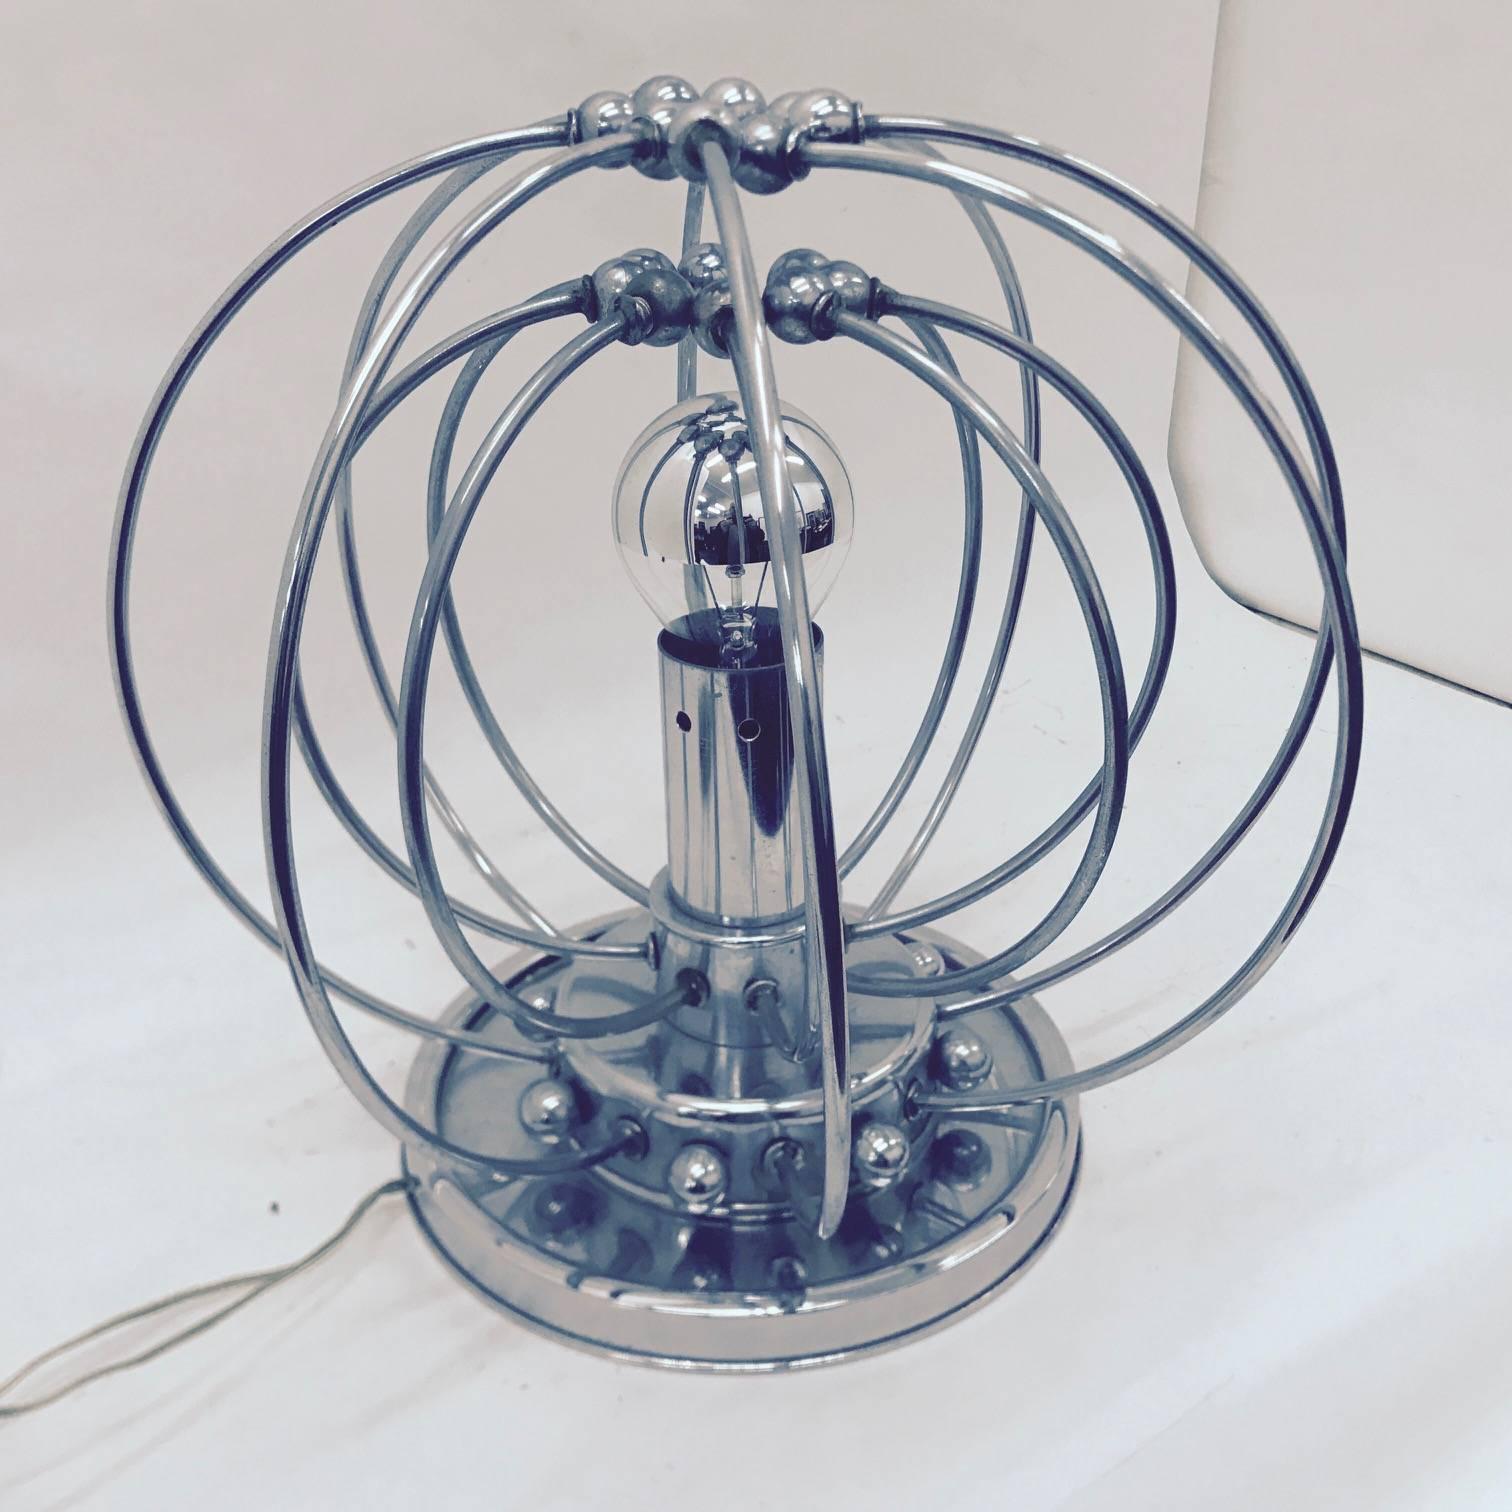 Rare vintage chrome Italian table lamp in the style of Studio Tetrarch, made in the 1960s, good conditions overall.
It works with both 110 and 220 Volt and needs regular e27 bulb. The Table Lamp, inspired by the iconic Pistillo Lamp, is a highly